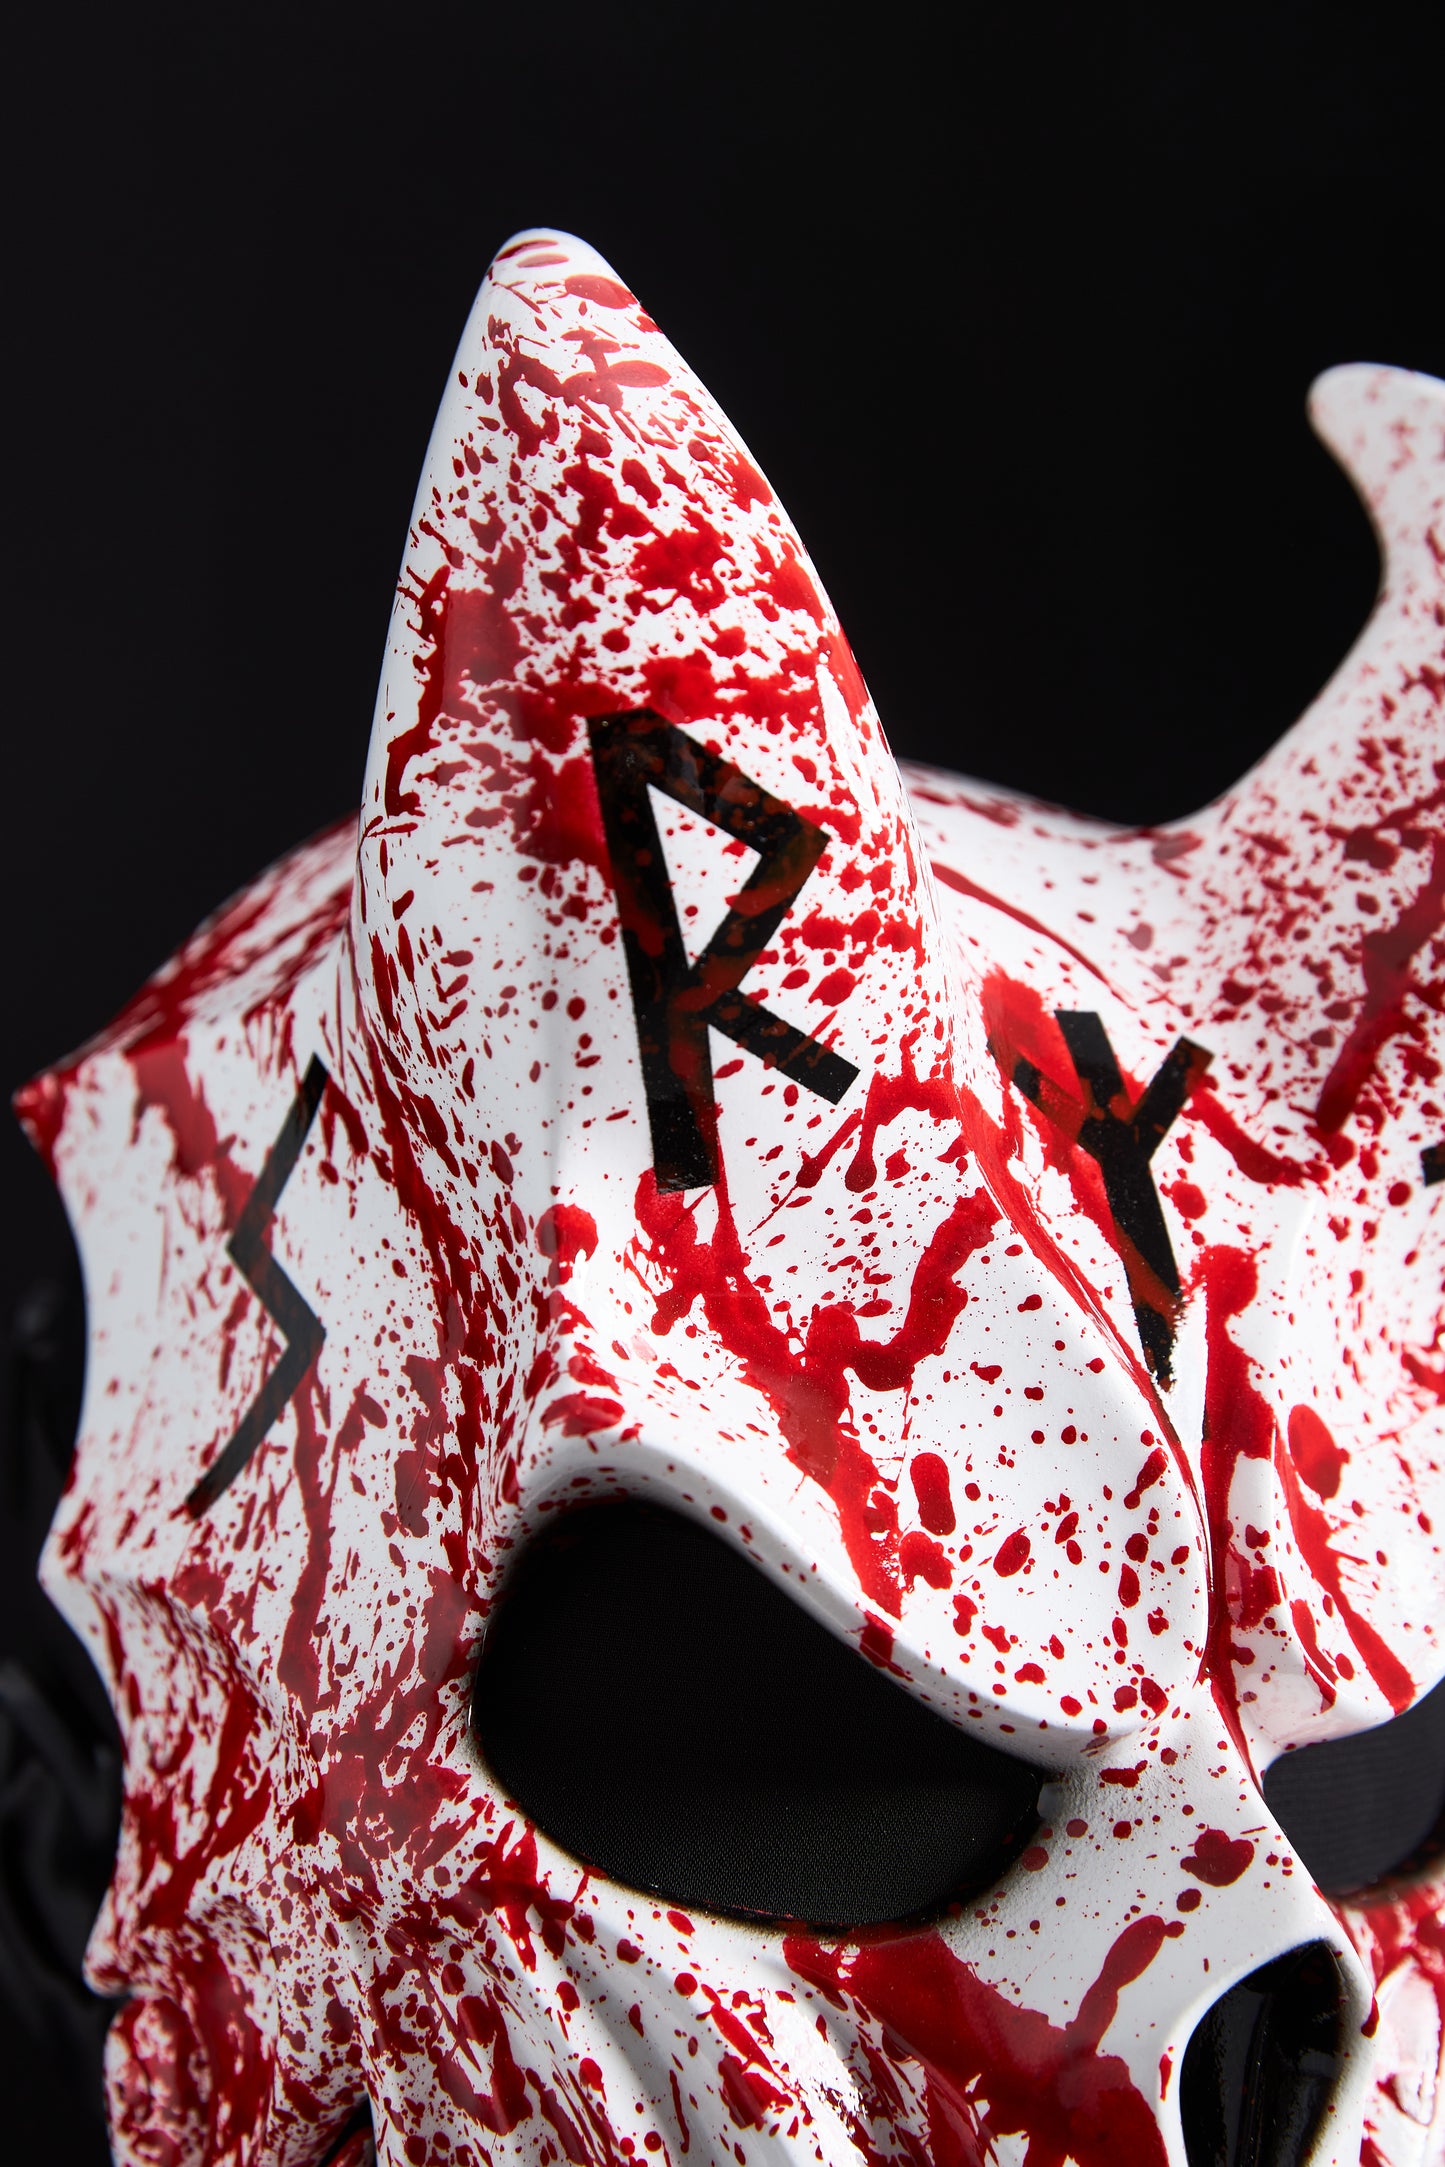 (SLAUGHTER TO PREVAIL) ALEX TERRIBLE MASK “KID OF DARKNESS” (BLOOD)